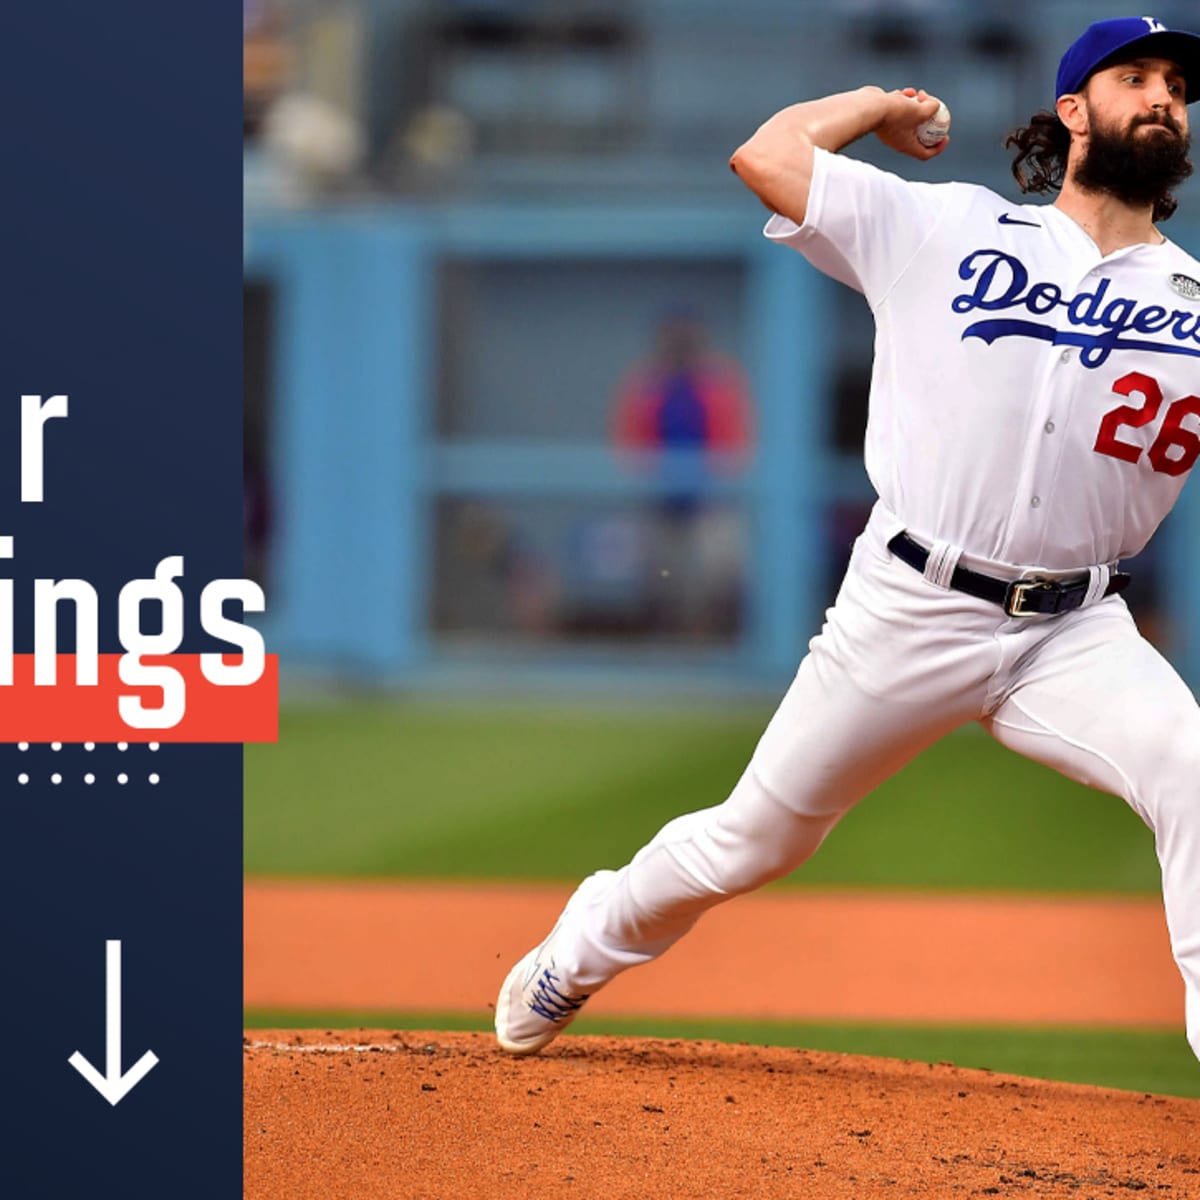 MLB Power Rankings: The 50 Strangest Batting Stances and Pitching